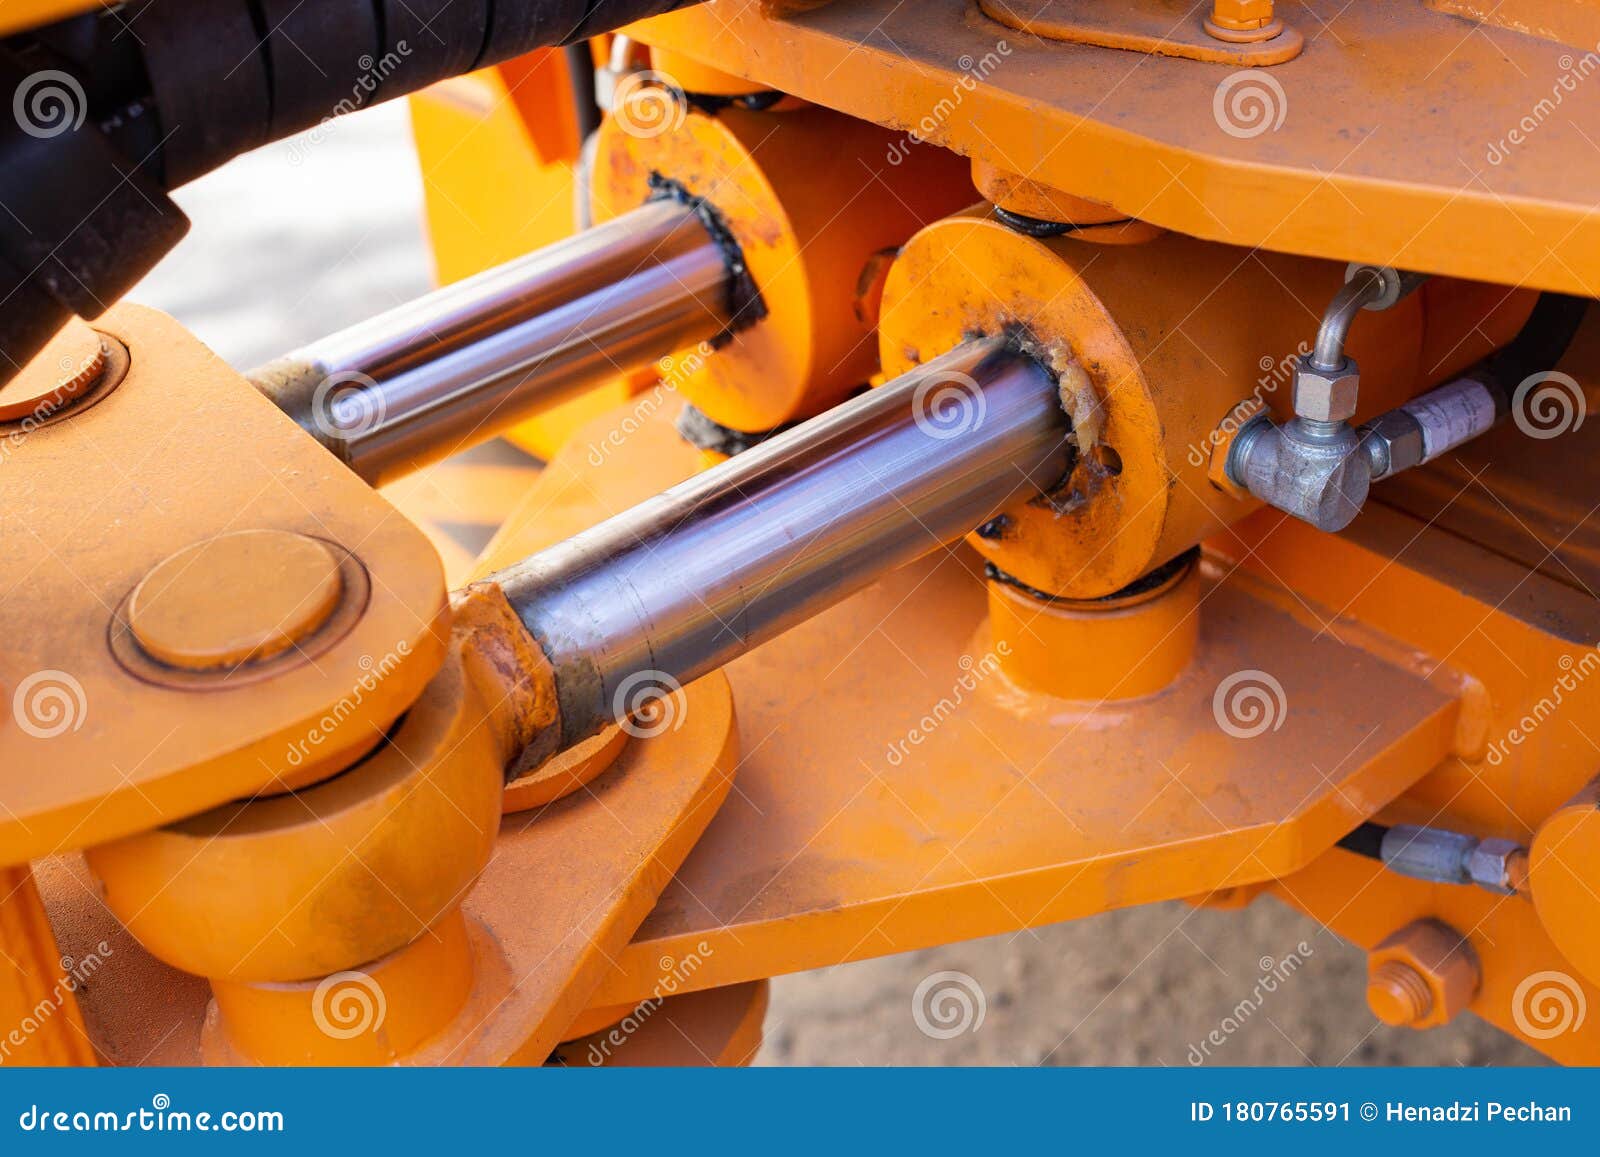 powerful hydraulic pumps that stand in the bucket of an excavator, industry, close-up, orange